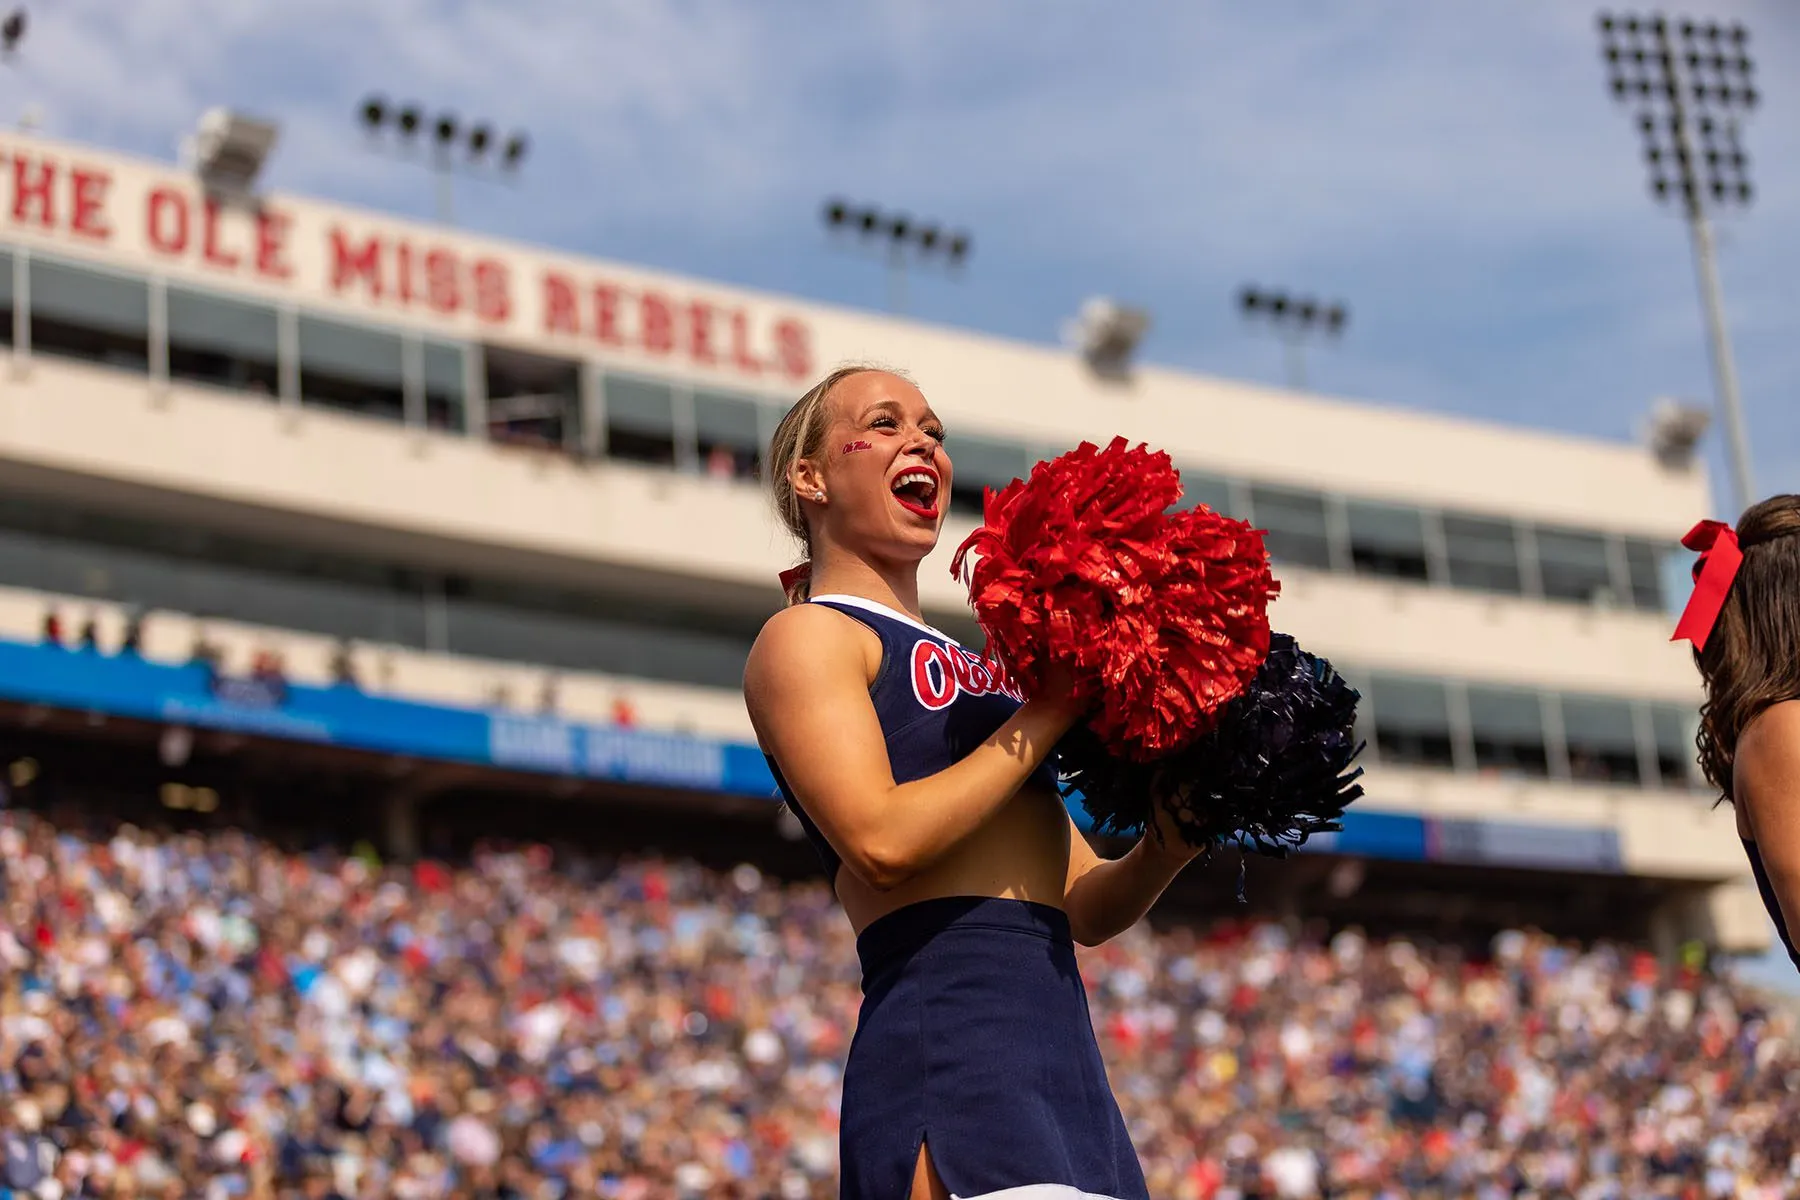 An Ole Miss Rebels cheerleader gets the crowd fired up during a college football game.